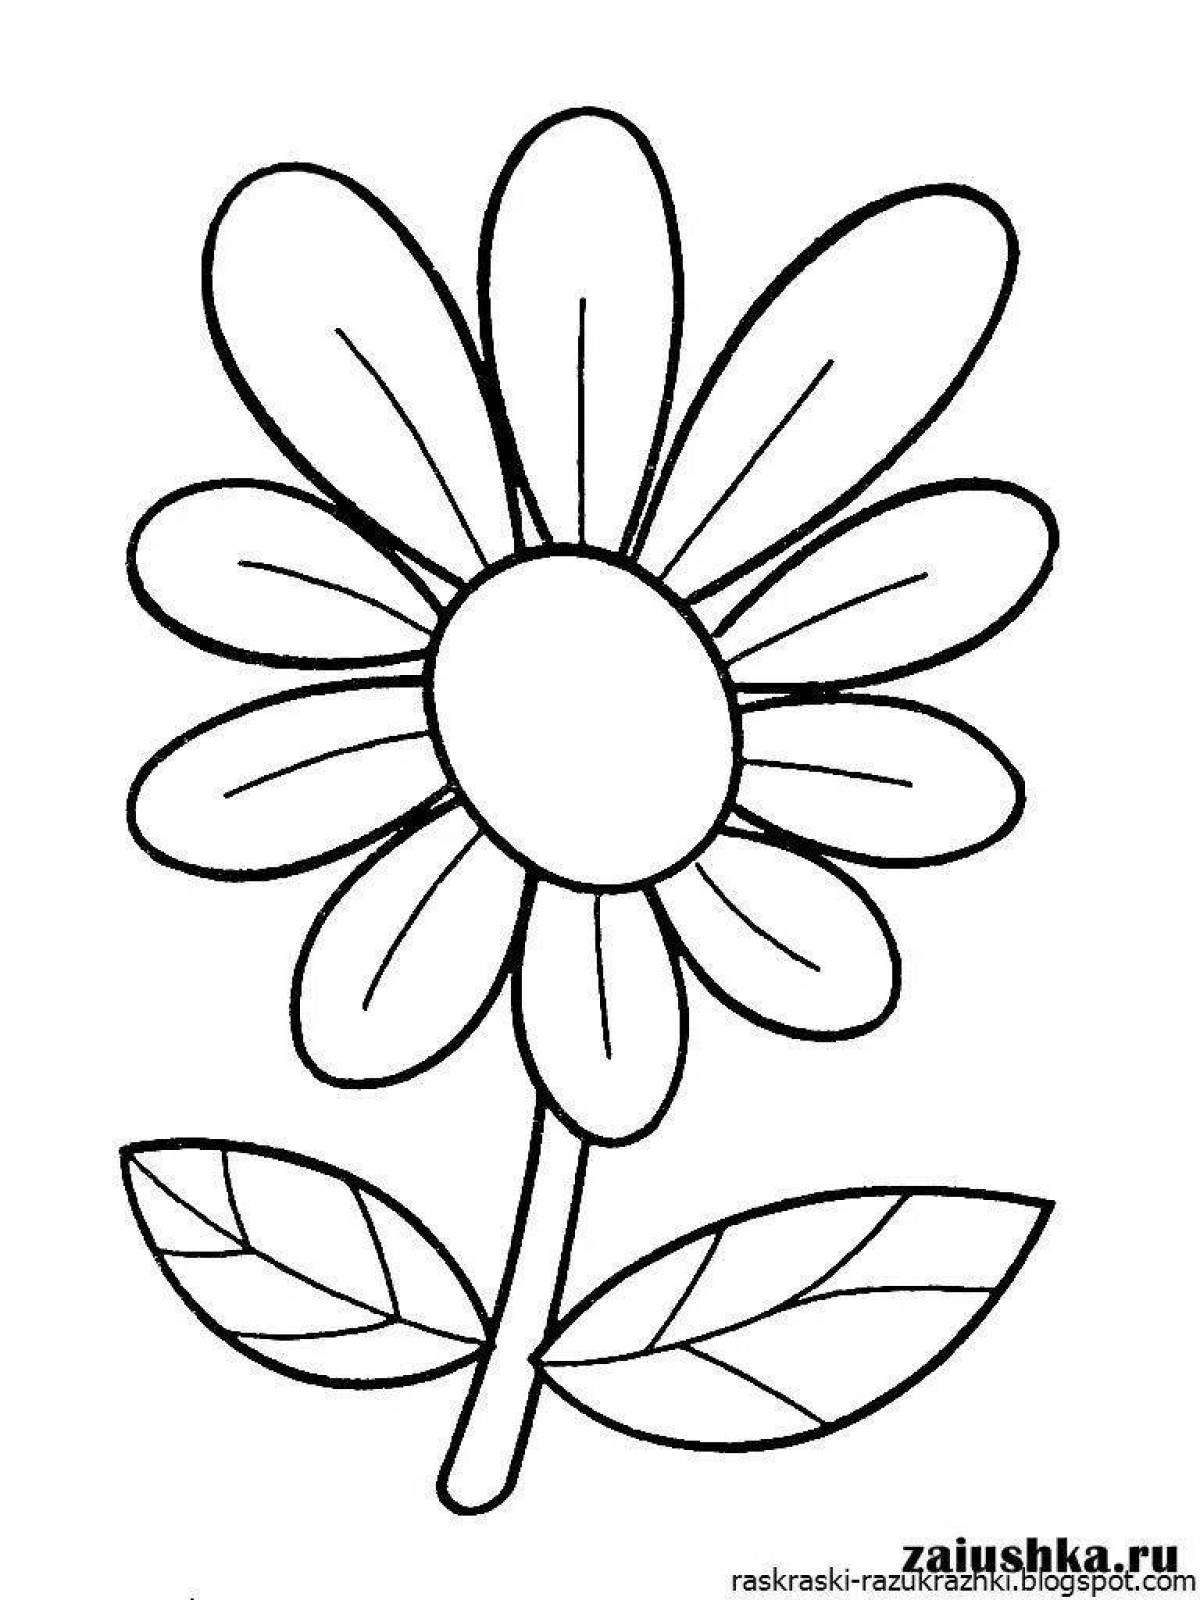 Coloring book glowing chamomile flower